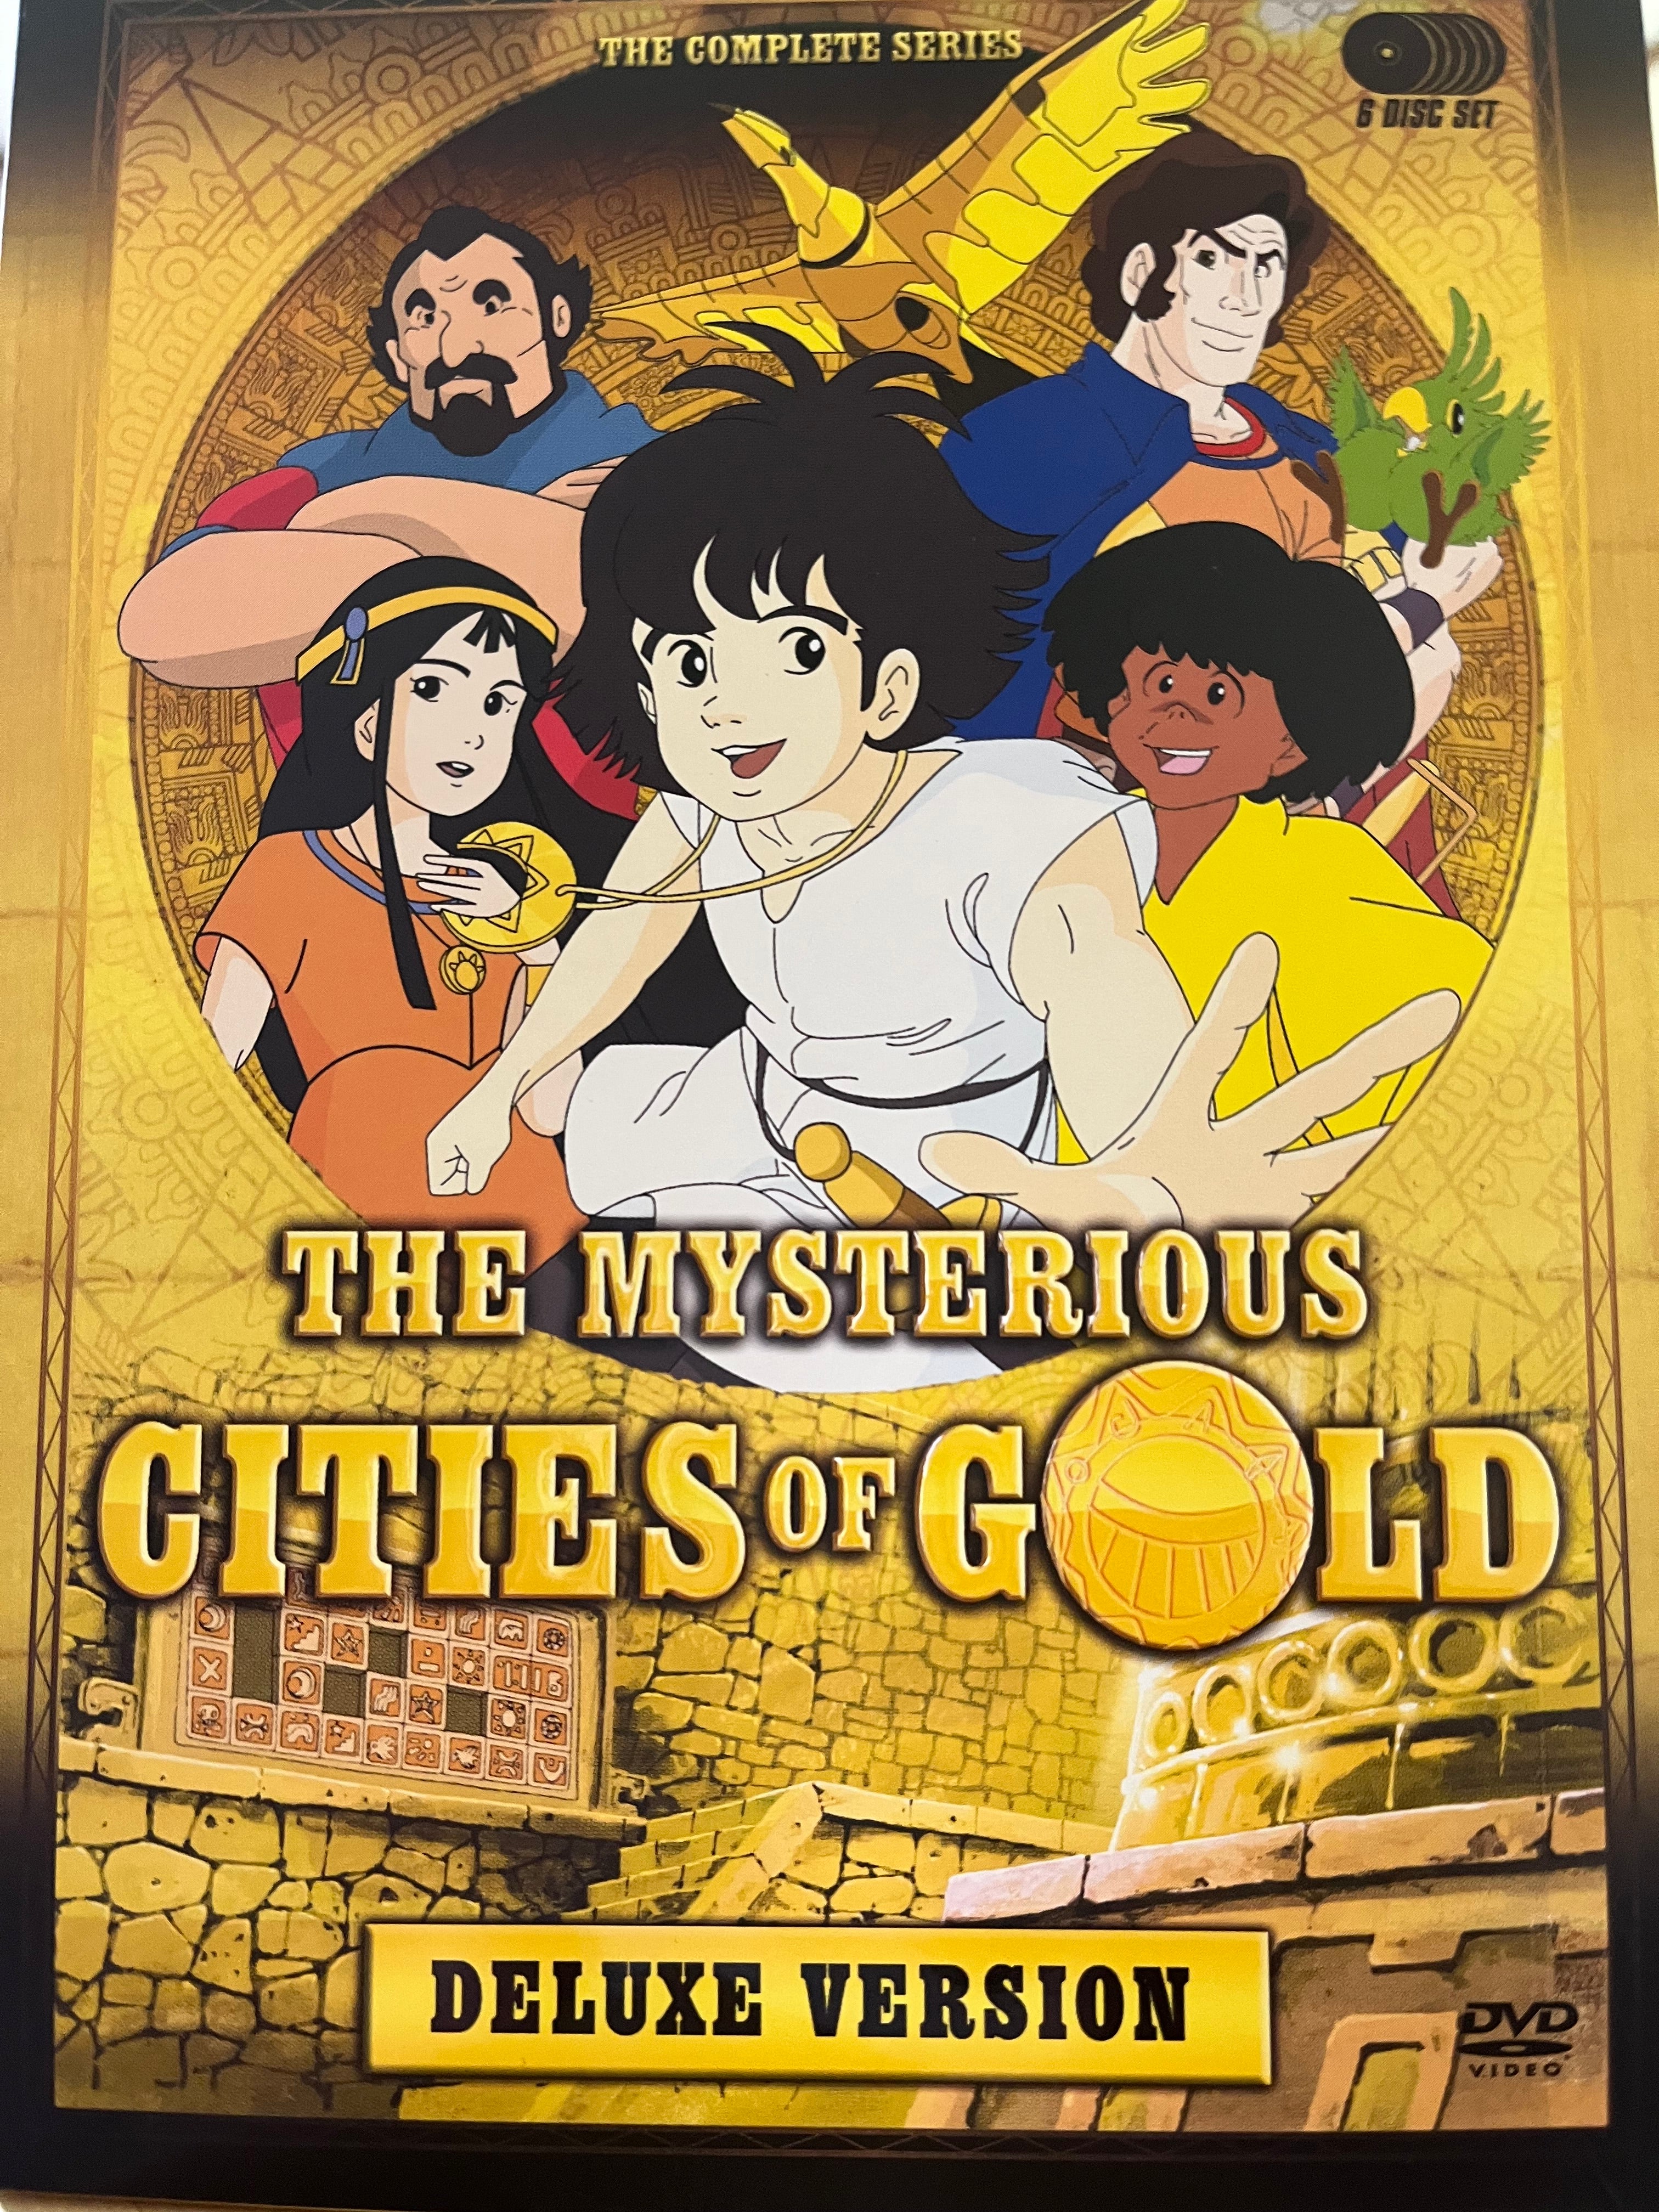 Mysterious Cities of Gold -DELUXE EDITION Complete Series (DVD, 2009, 6-Disc)